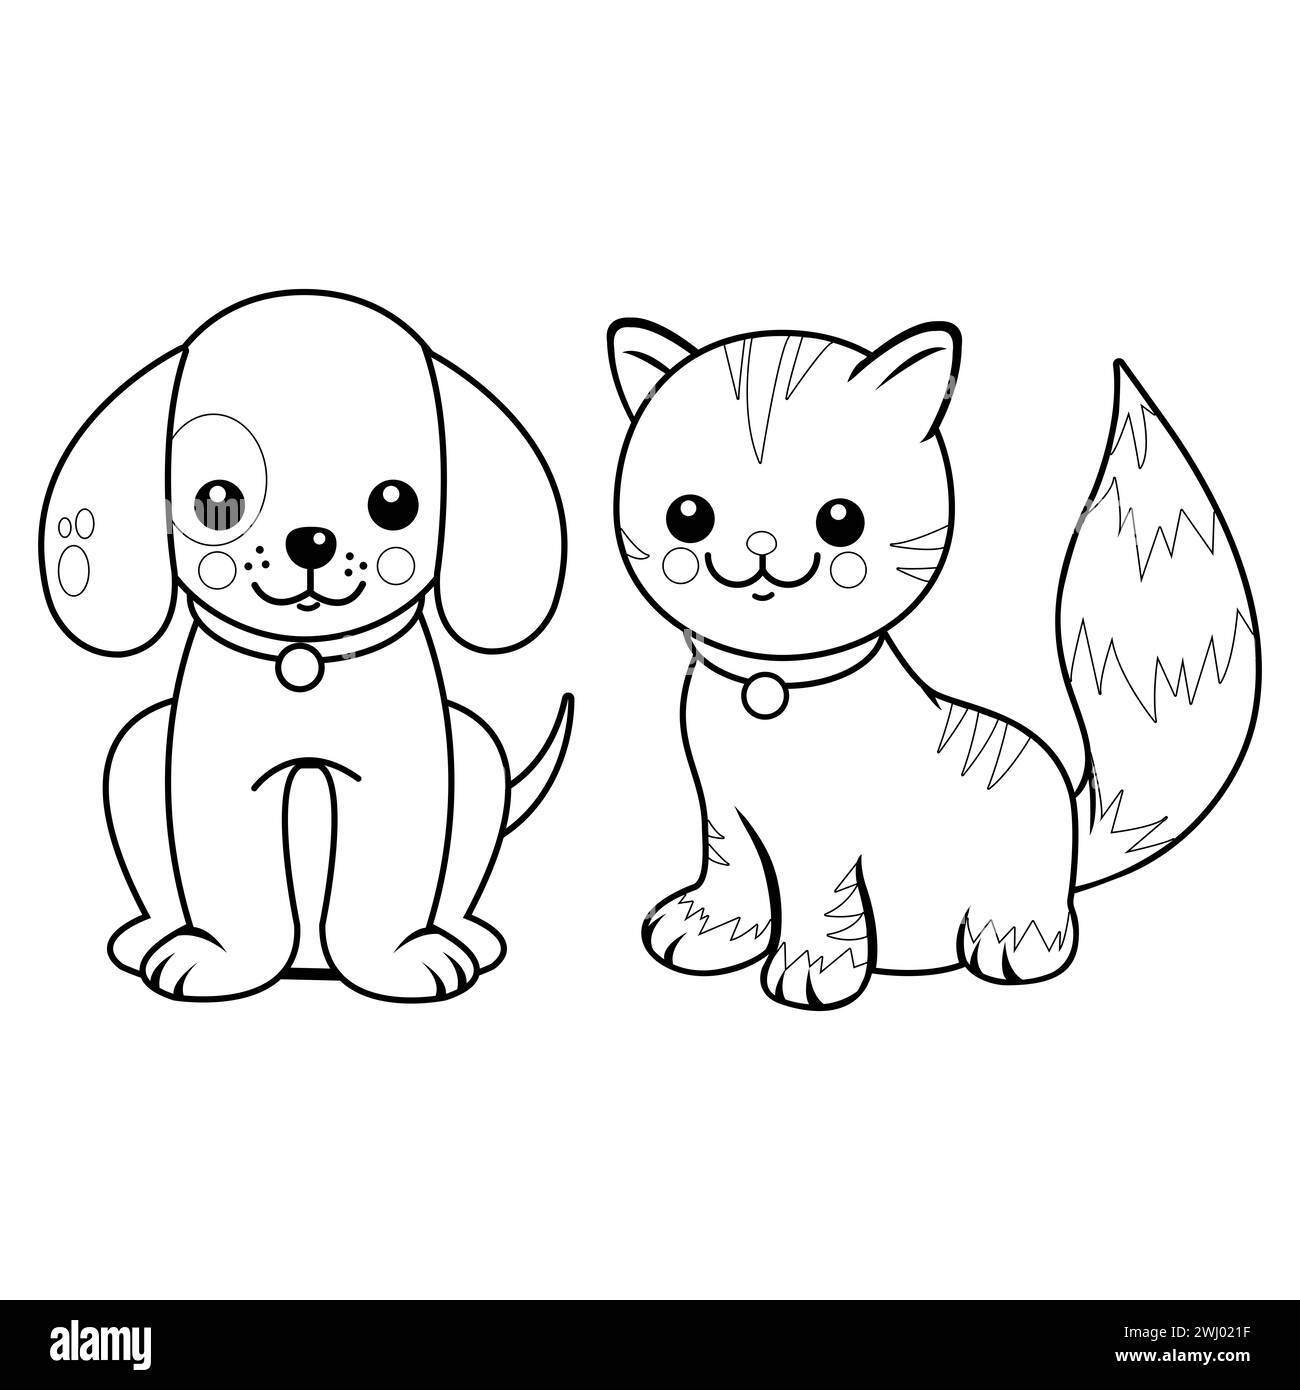 Cat and dog. Cartoon pet characters, a dog and a cat. Black and white illustration. Black and white coloring page Stock Photo